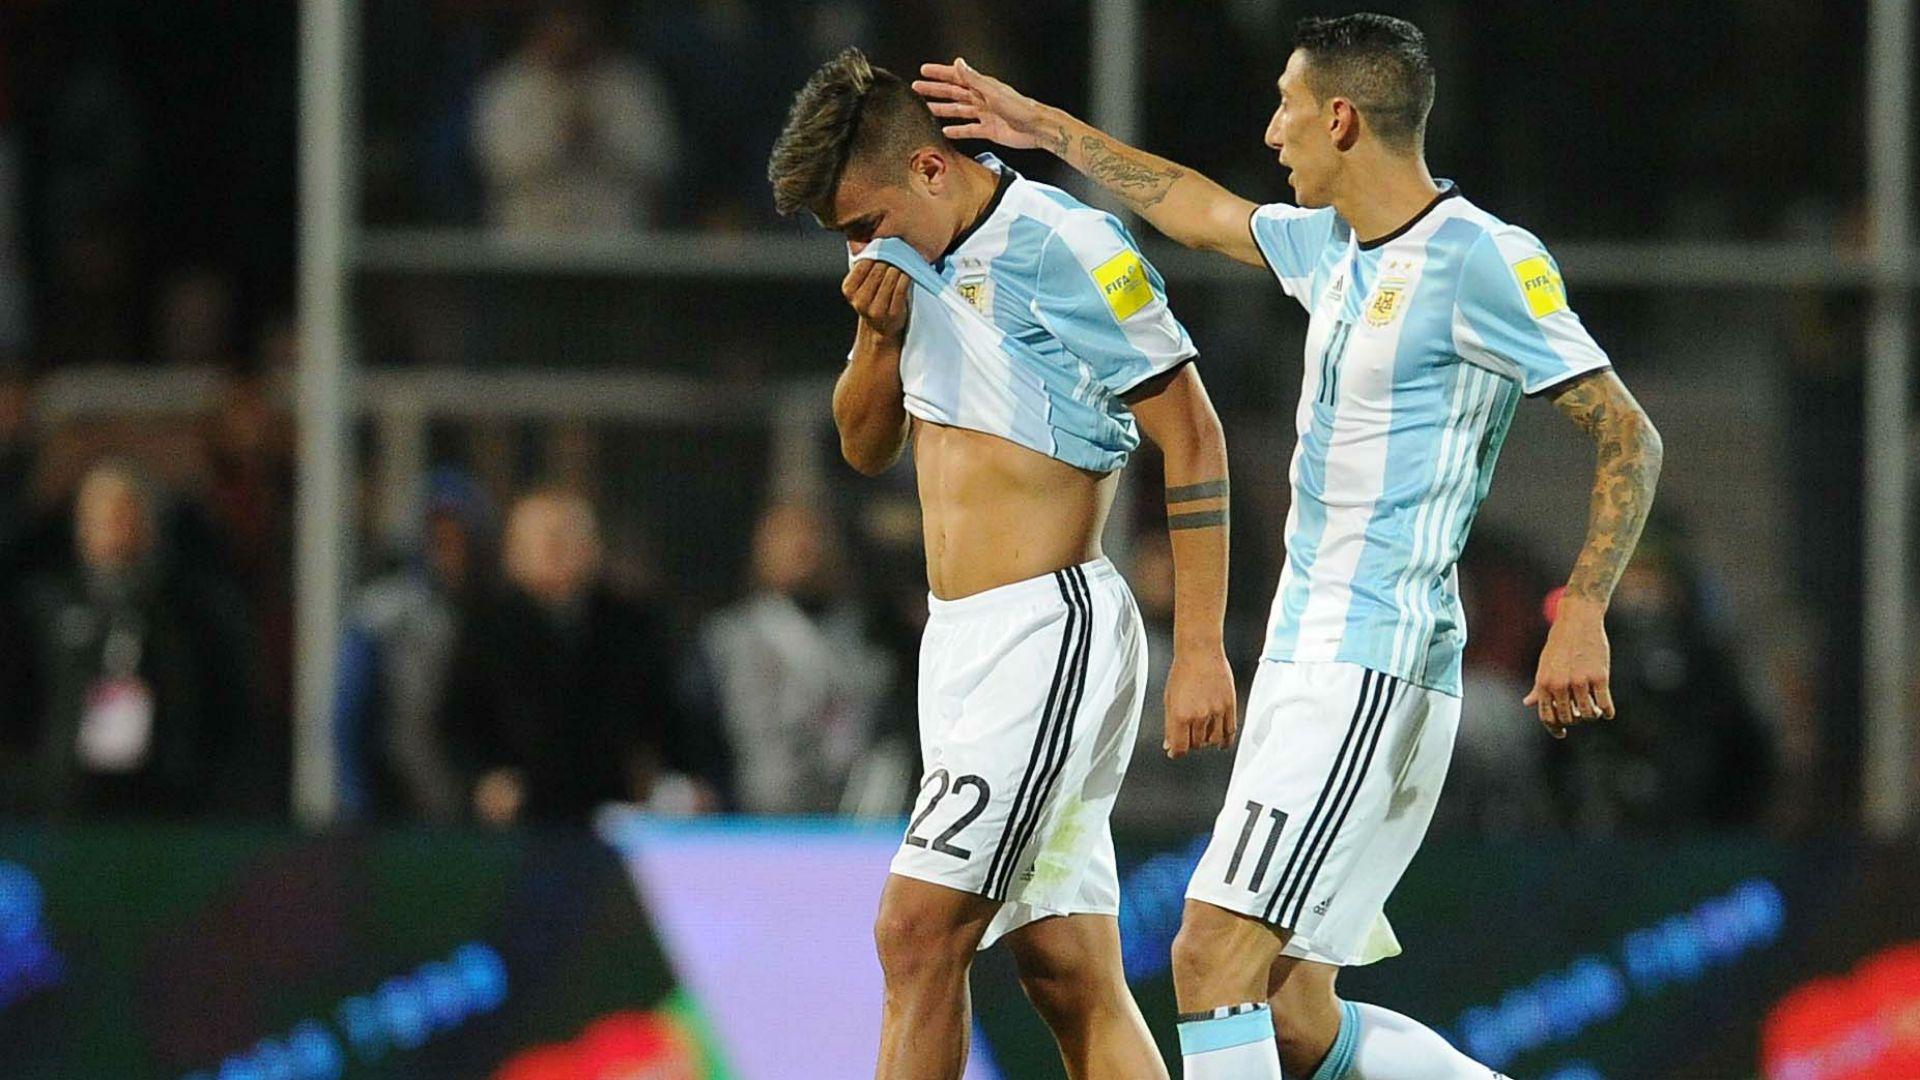 Paulo Dybala is Messi's heir for Argentina at Barca